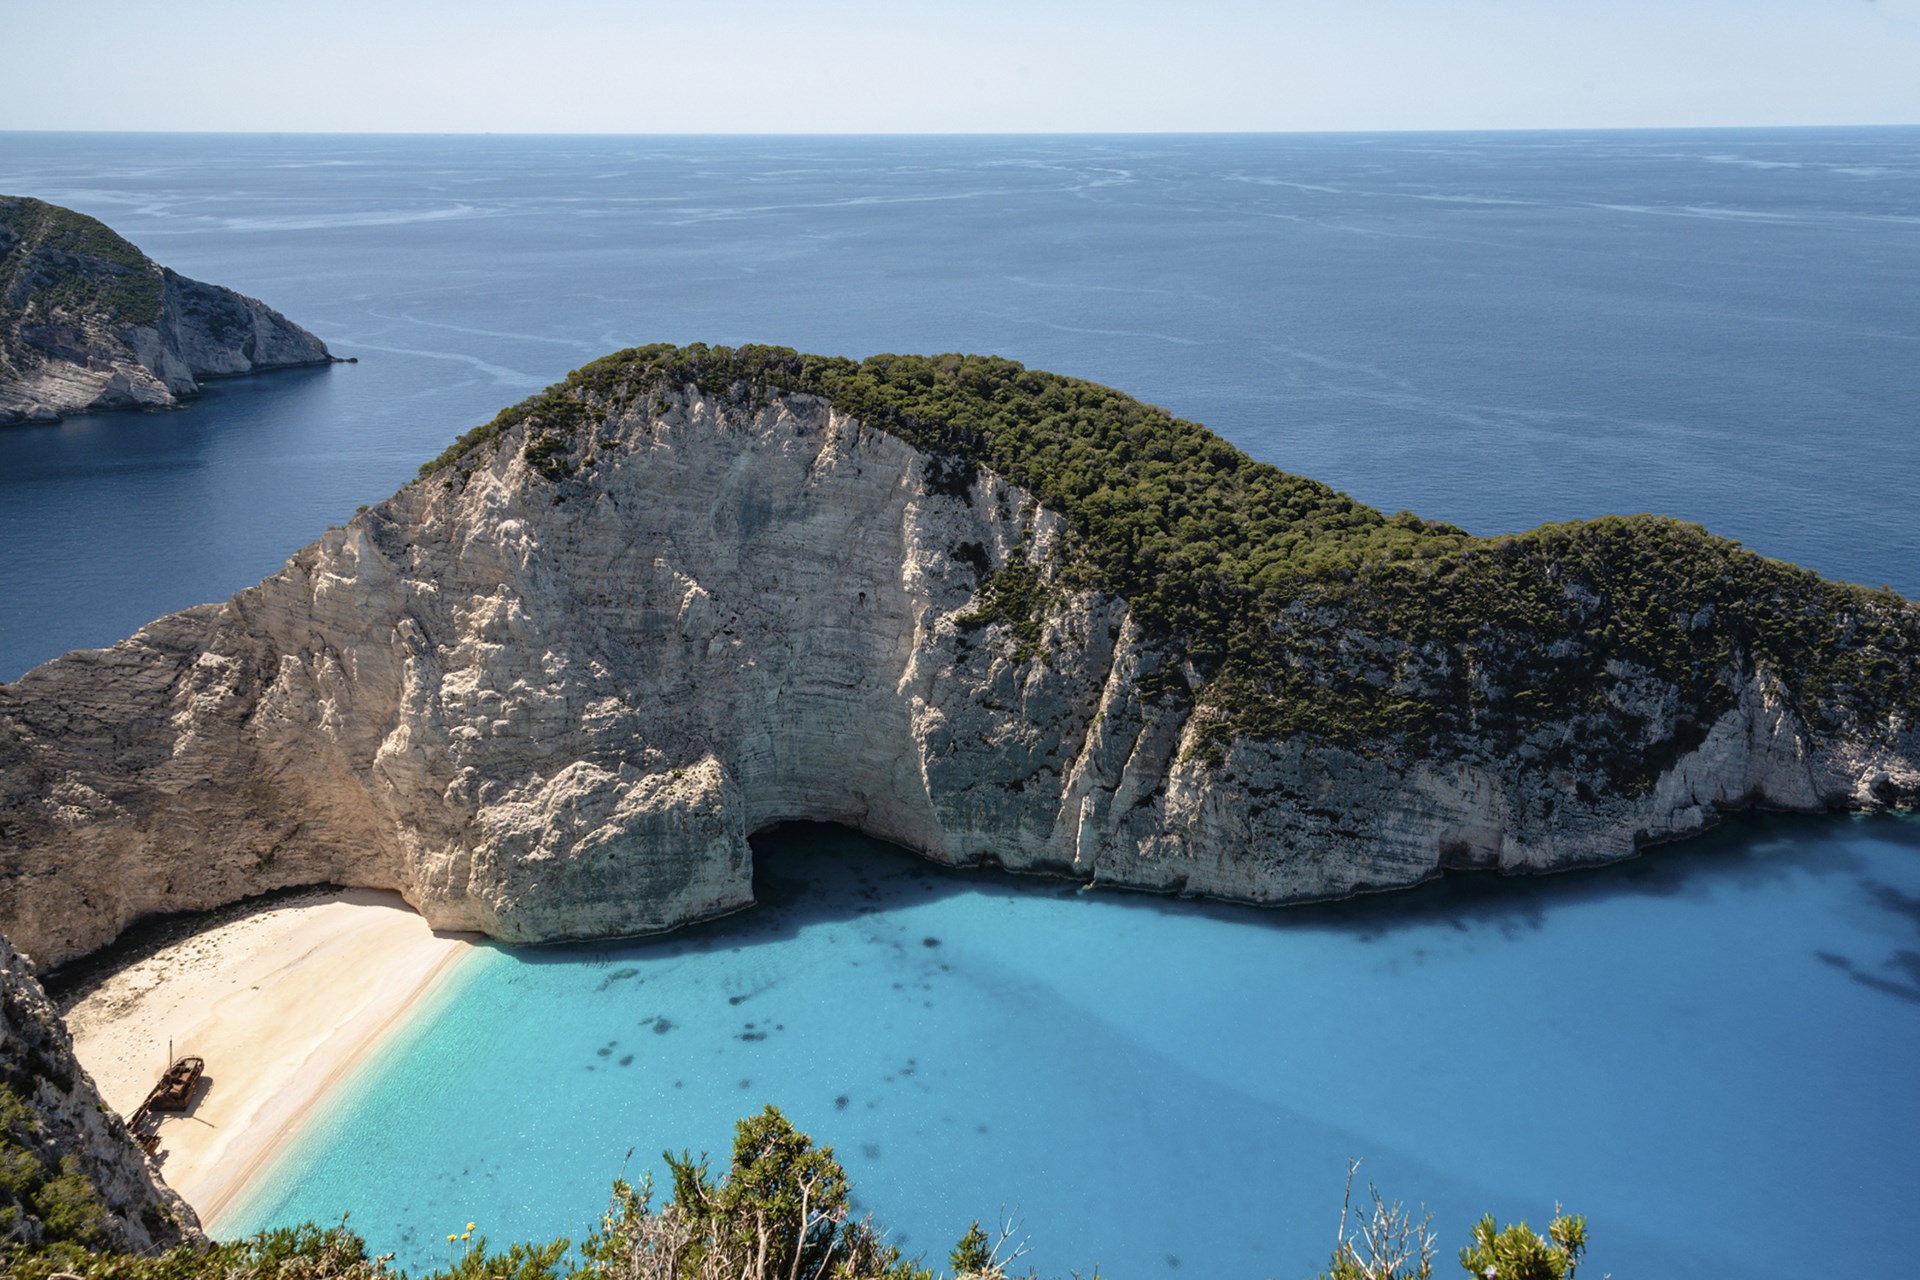 From sea turtles to shipwrecks: What you can see on a boat trip from Zakynthos